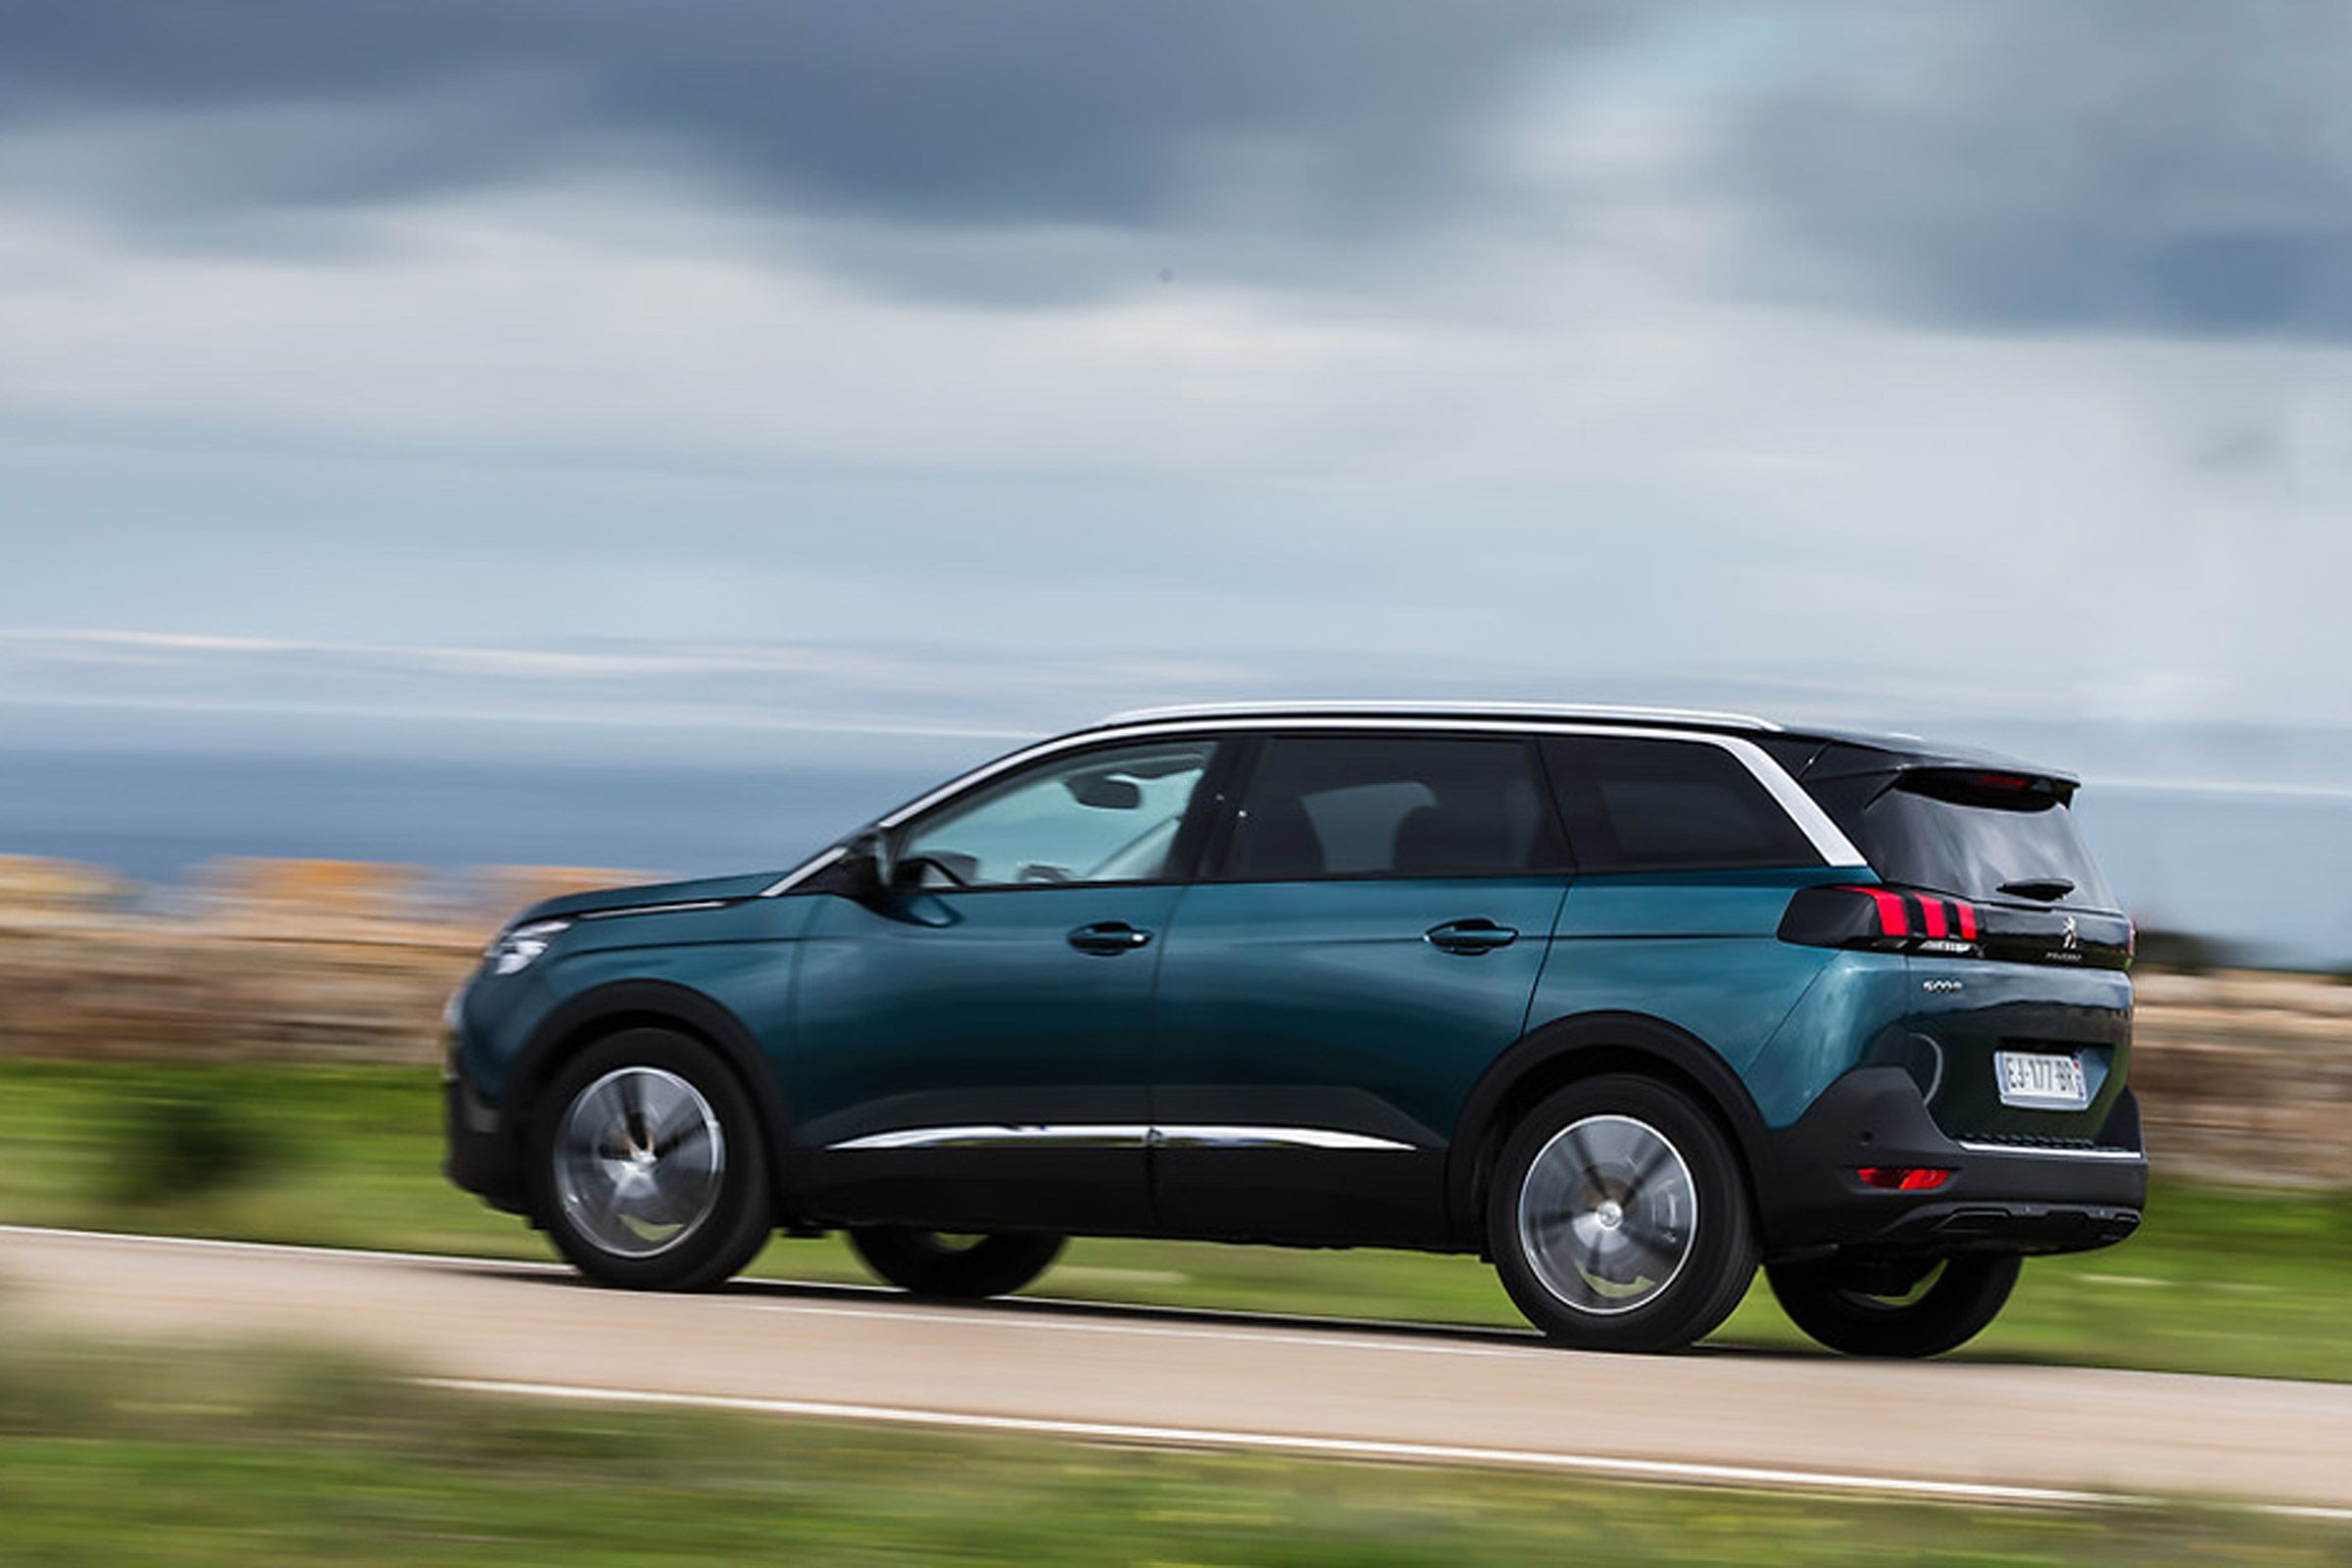 2017 Peugeot 5008 SUV Test Drive Side View (View 18 of 18)